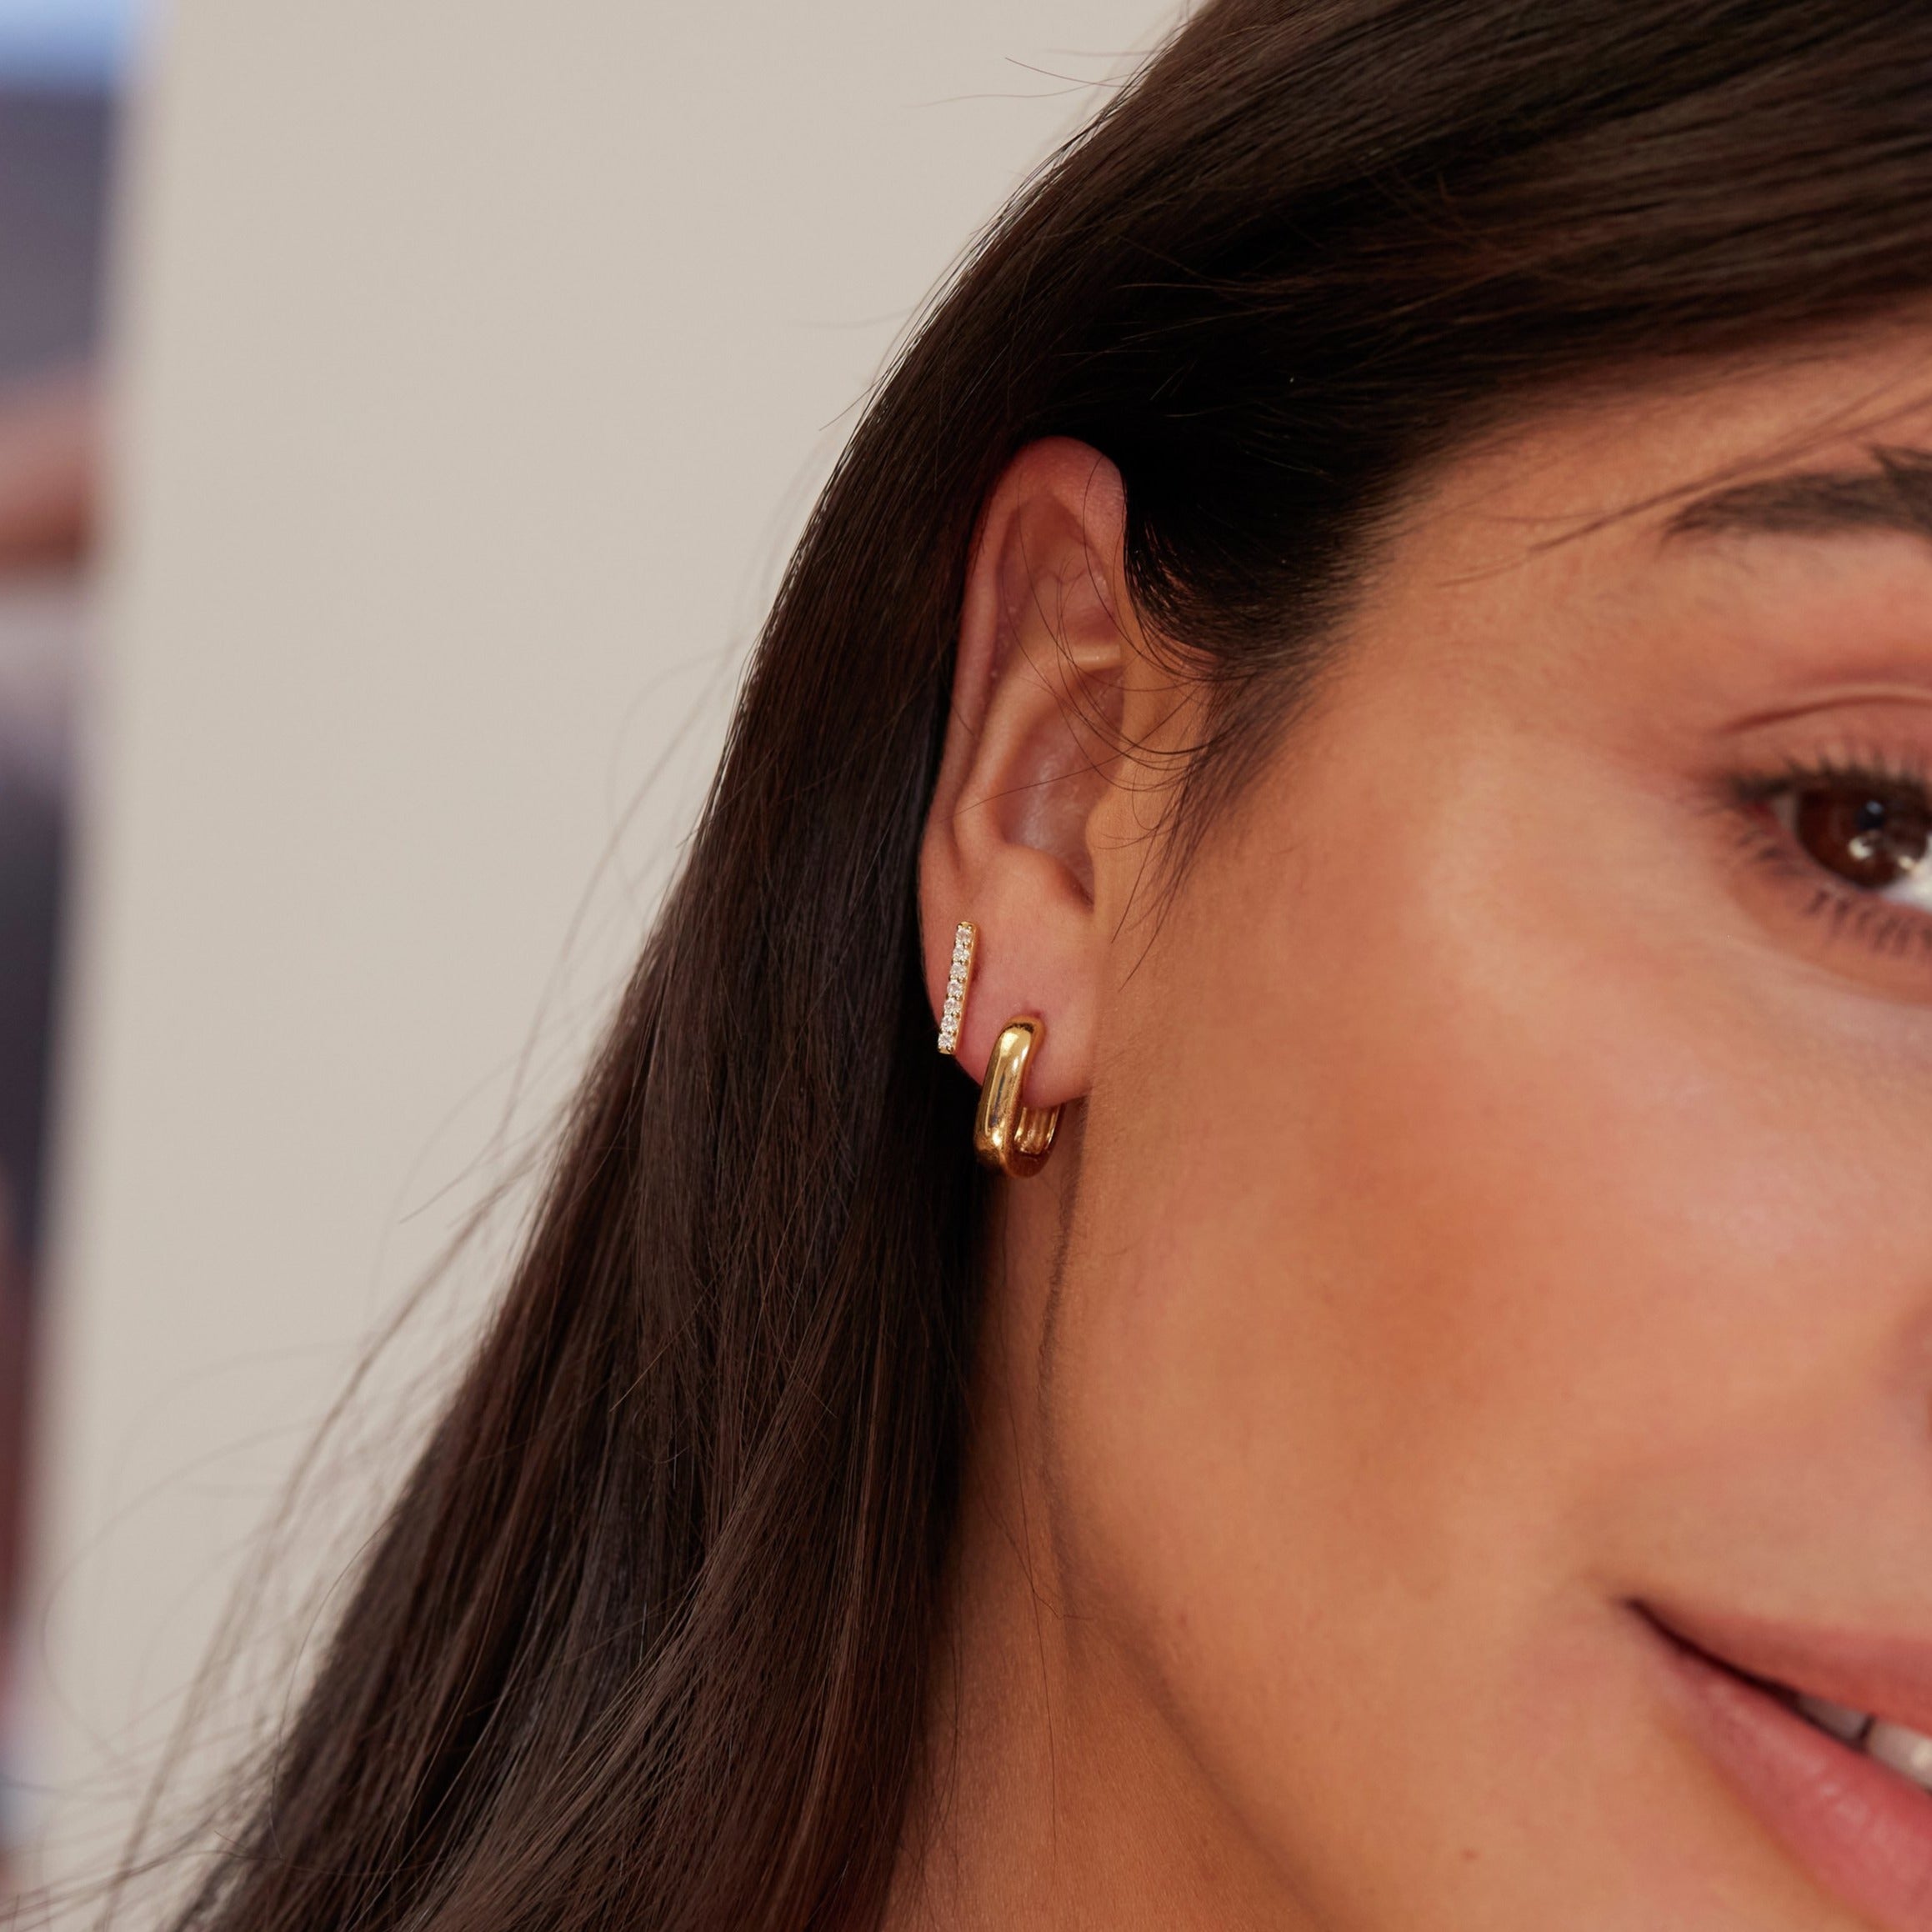 Close up of a gold diamond style bar stud earring and gold thick squared hoop earringin one ear lobe of a brunette woman 